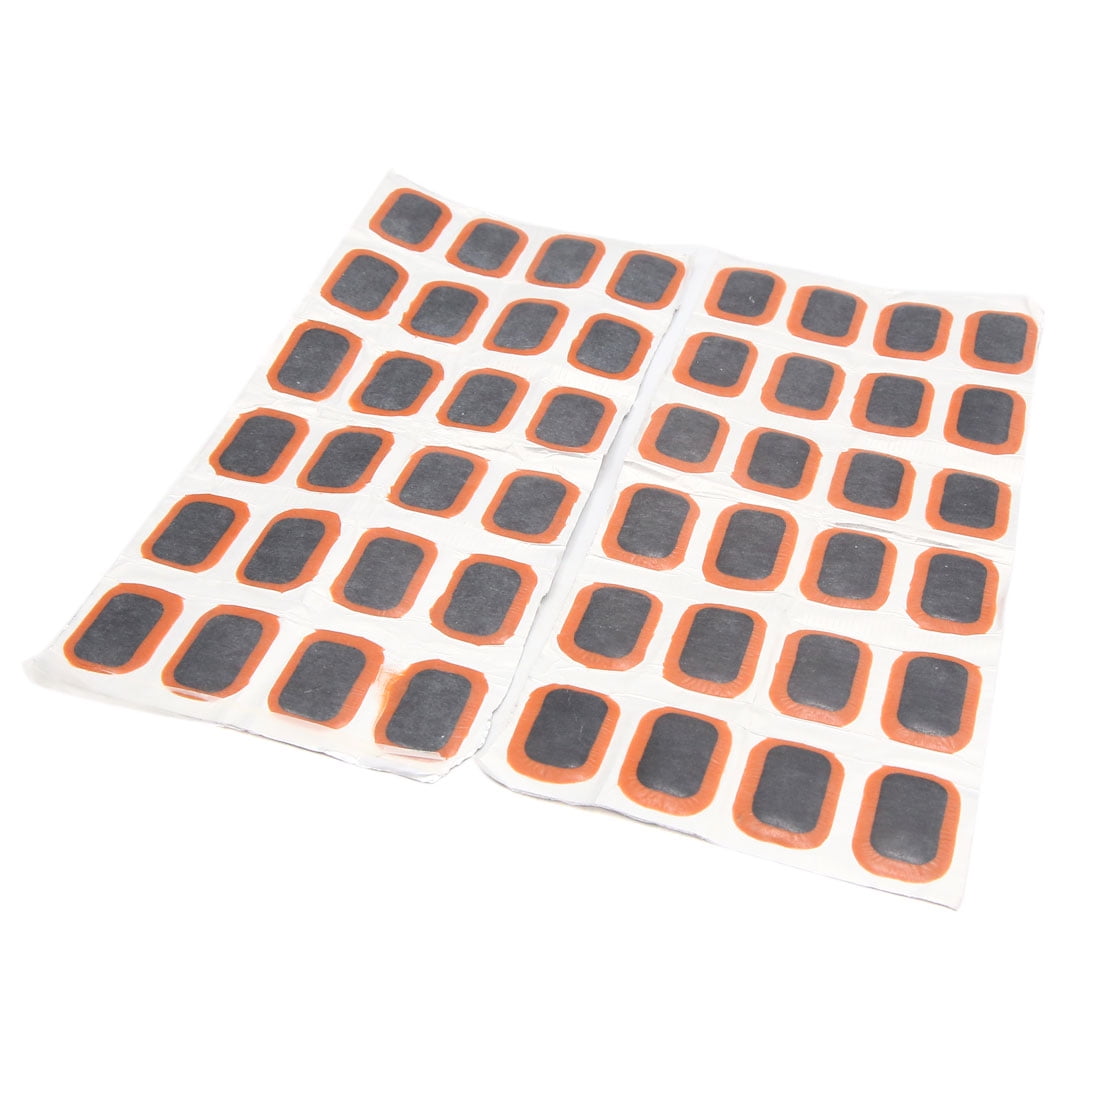 Sourcingmap 48pcs Tyre Puncture Patches Tire Repair Rubber Patch Tool for Auto Car 24 x 35mm 